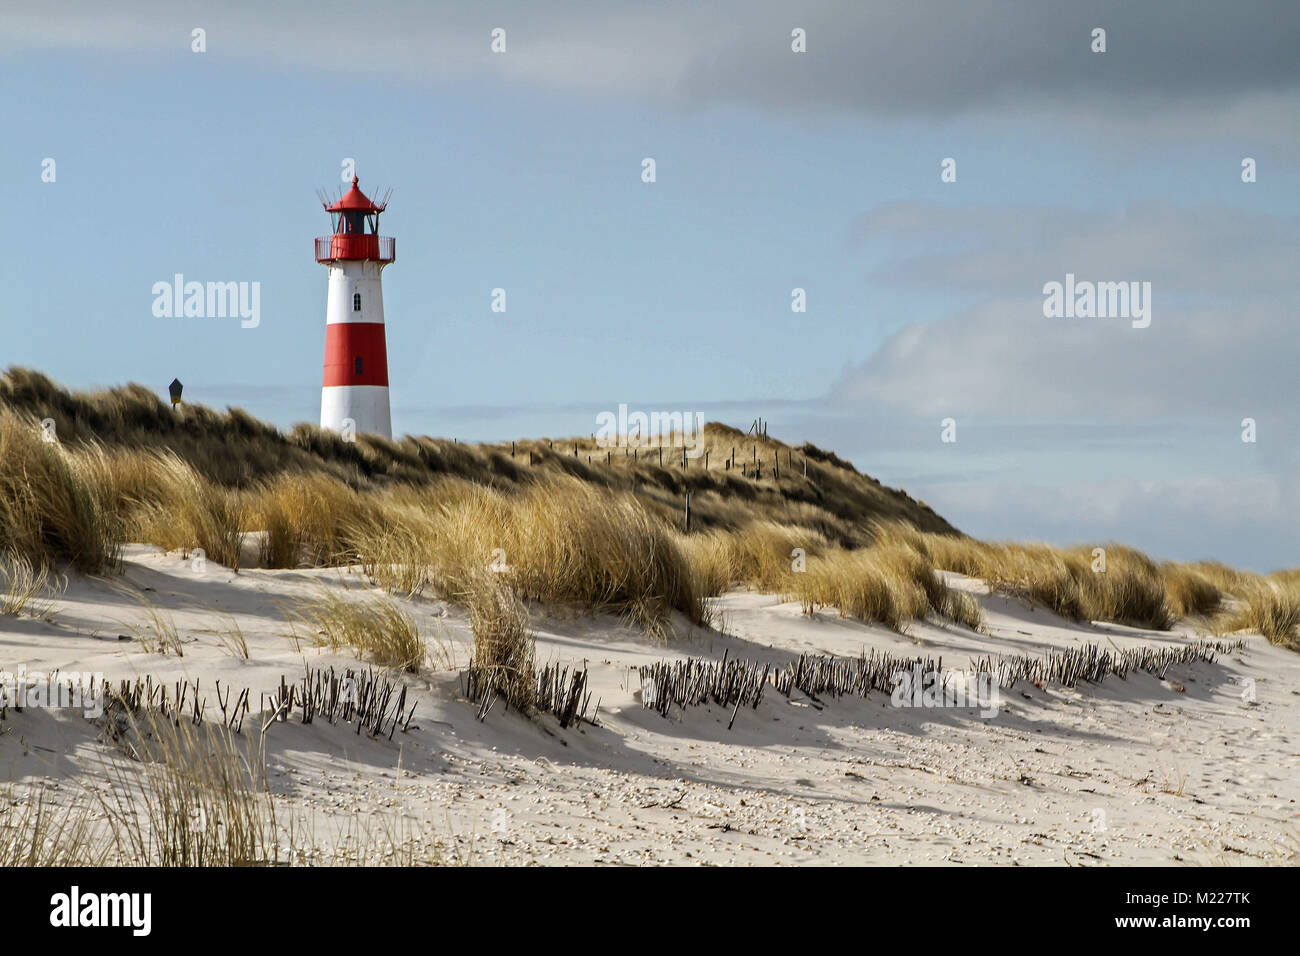 Lighthouse at Sylt island in Germany Stock Photo